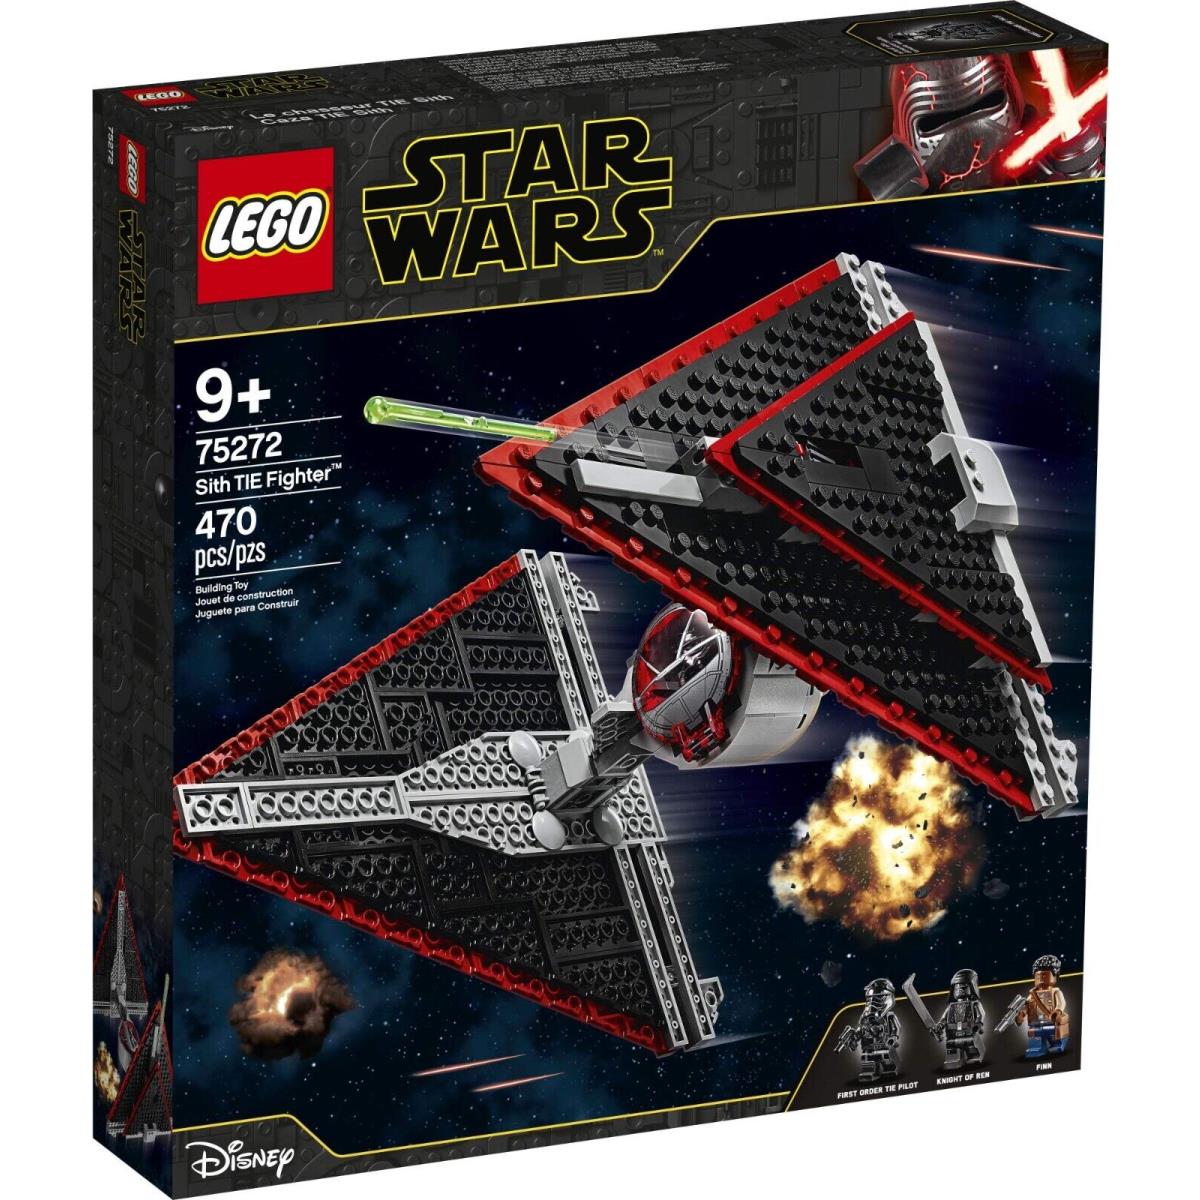 Lego Star Wars Sith Tie Fighter 75272 See Descrpition